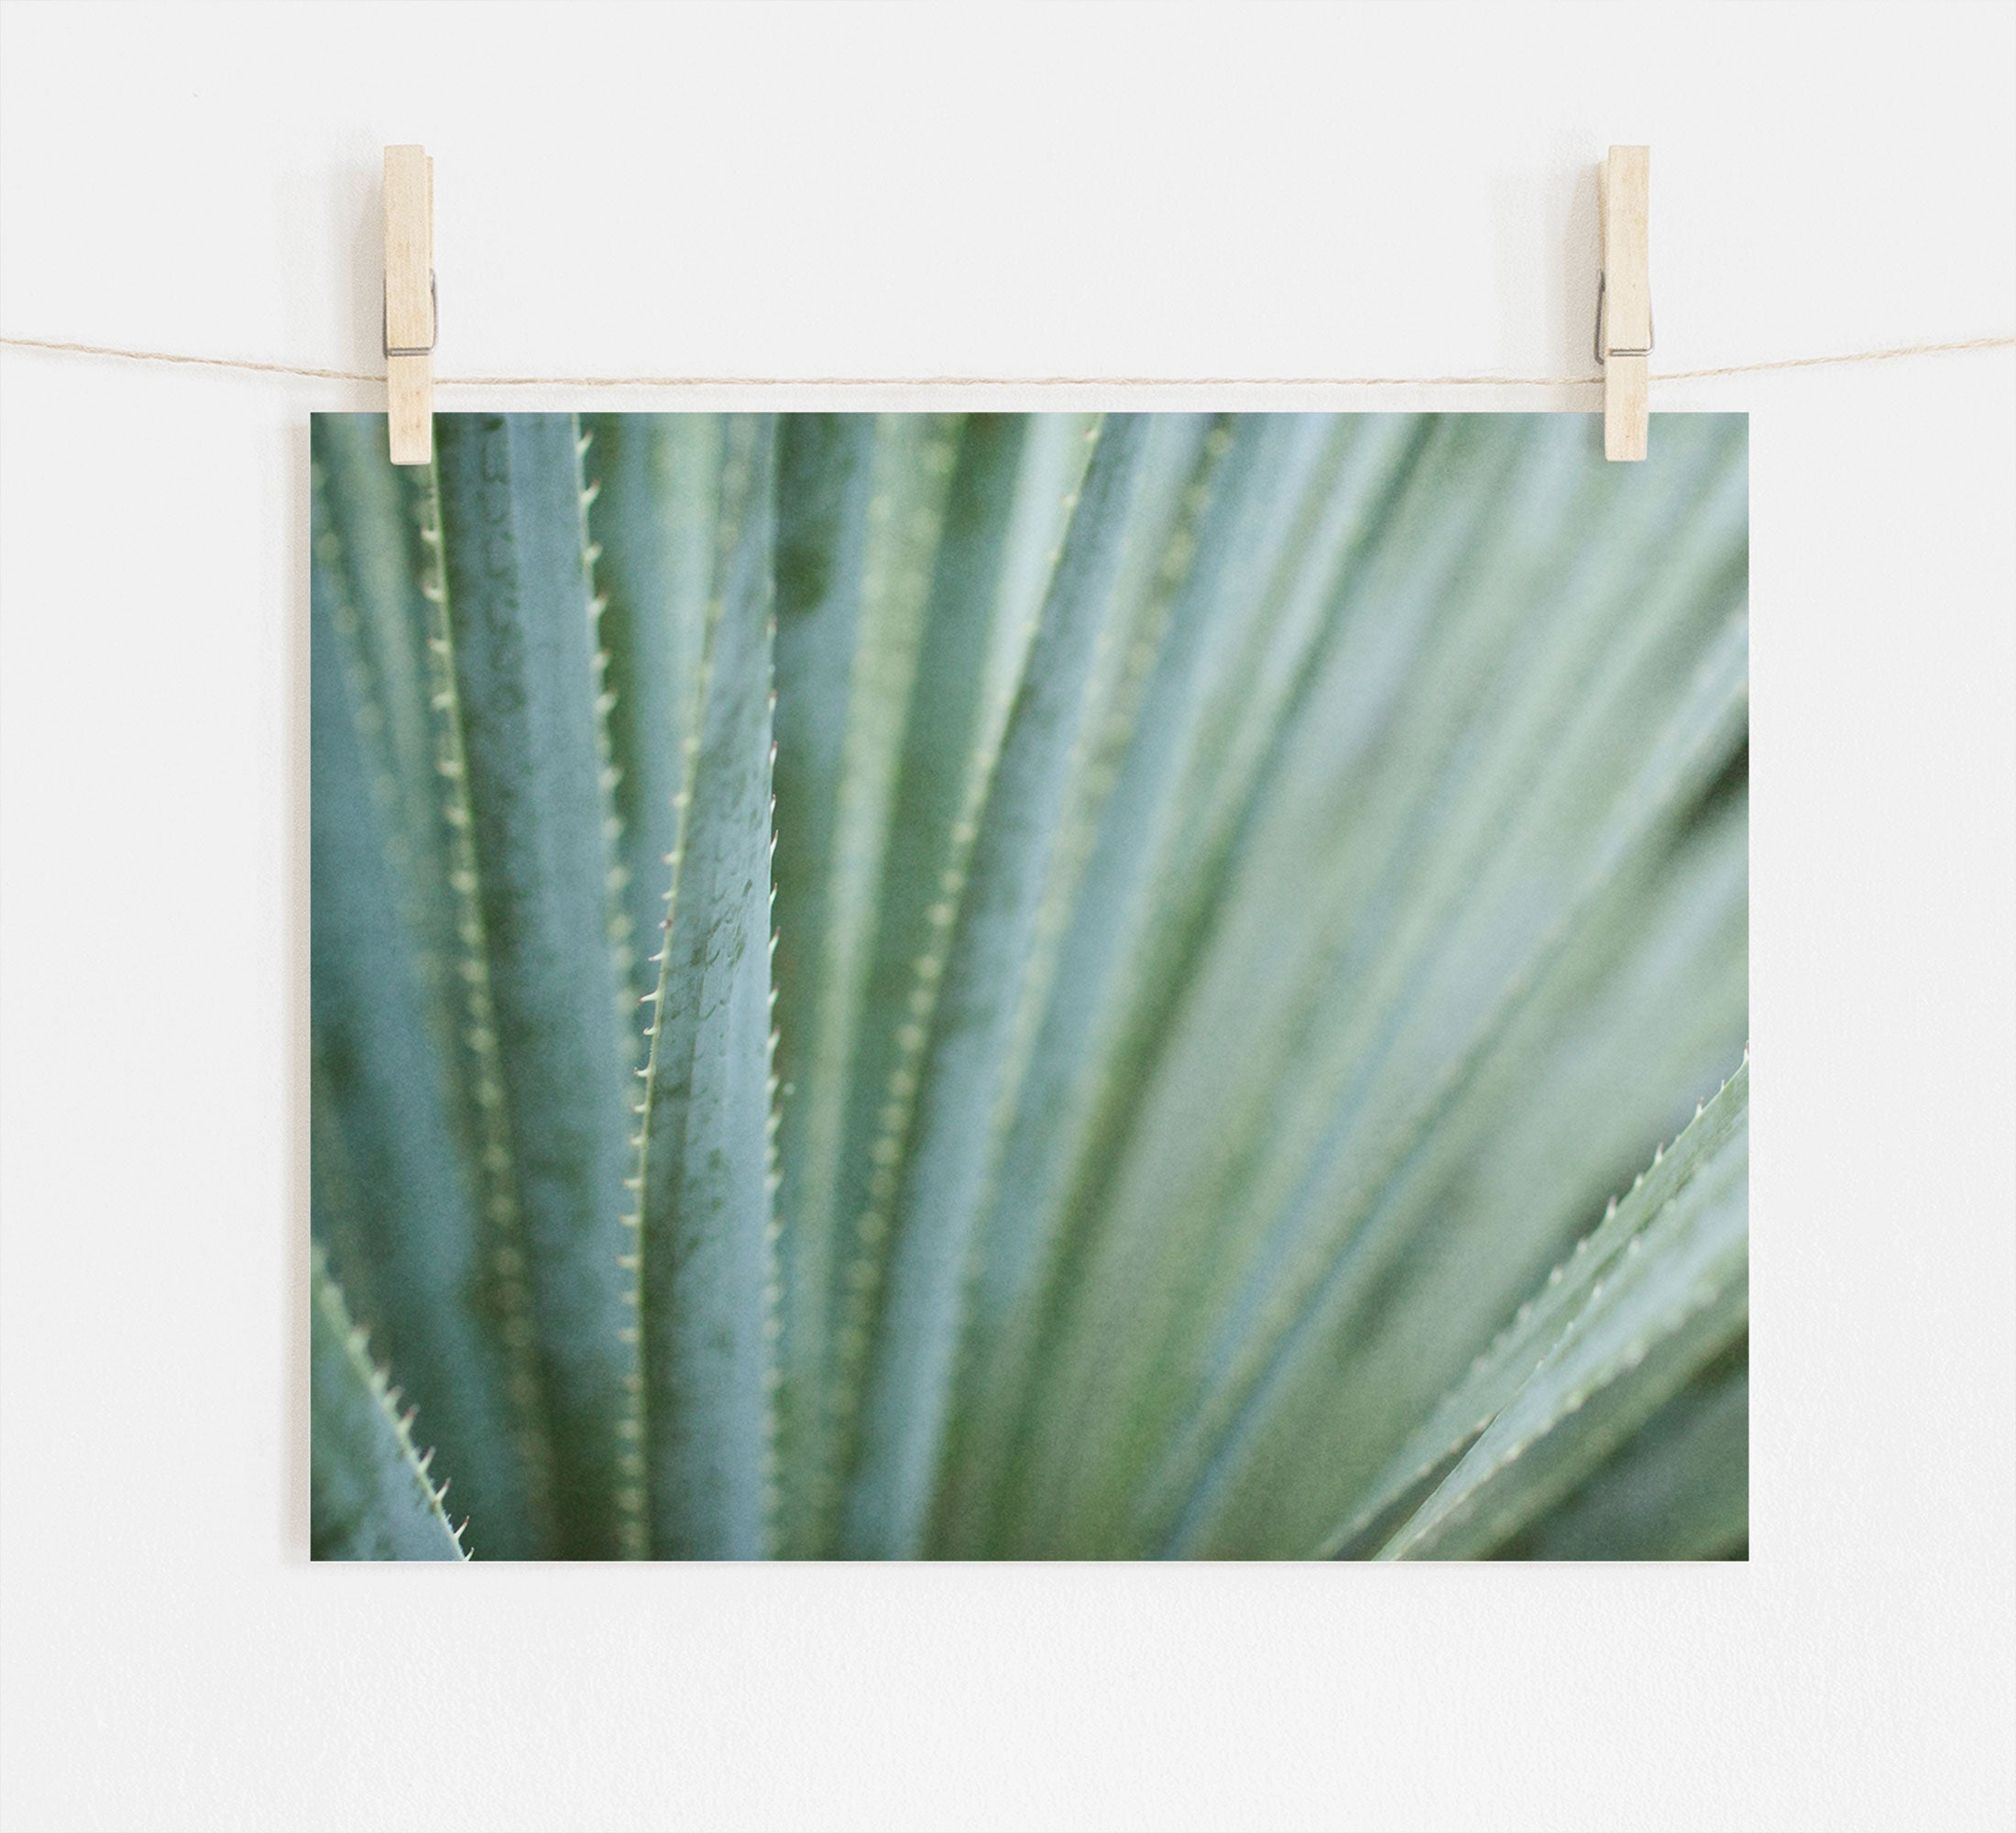 A close-up photo of a green agave plant with spiky leaves, displayed on archival photographic paper and clipped to a string with wooden clothespins, featuring the Abstract Green Botanical Print &#39;Strands and Spikes&#39; by Offley Green.